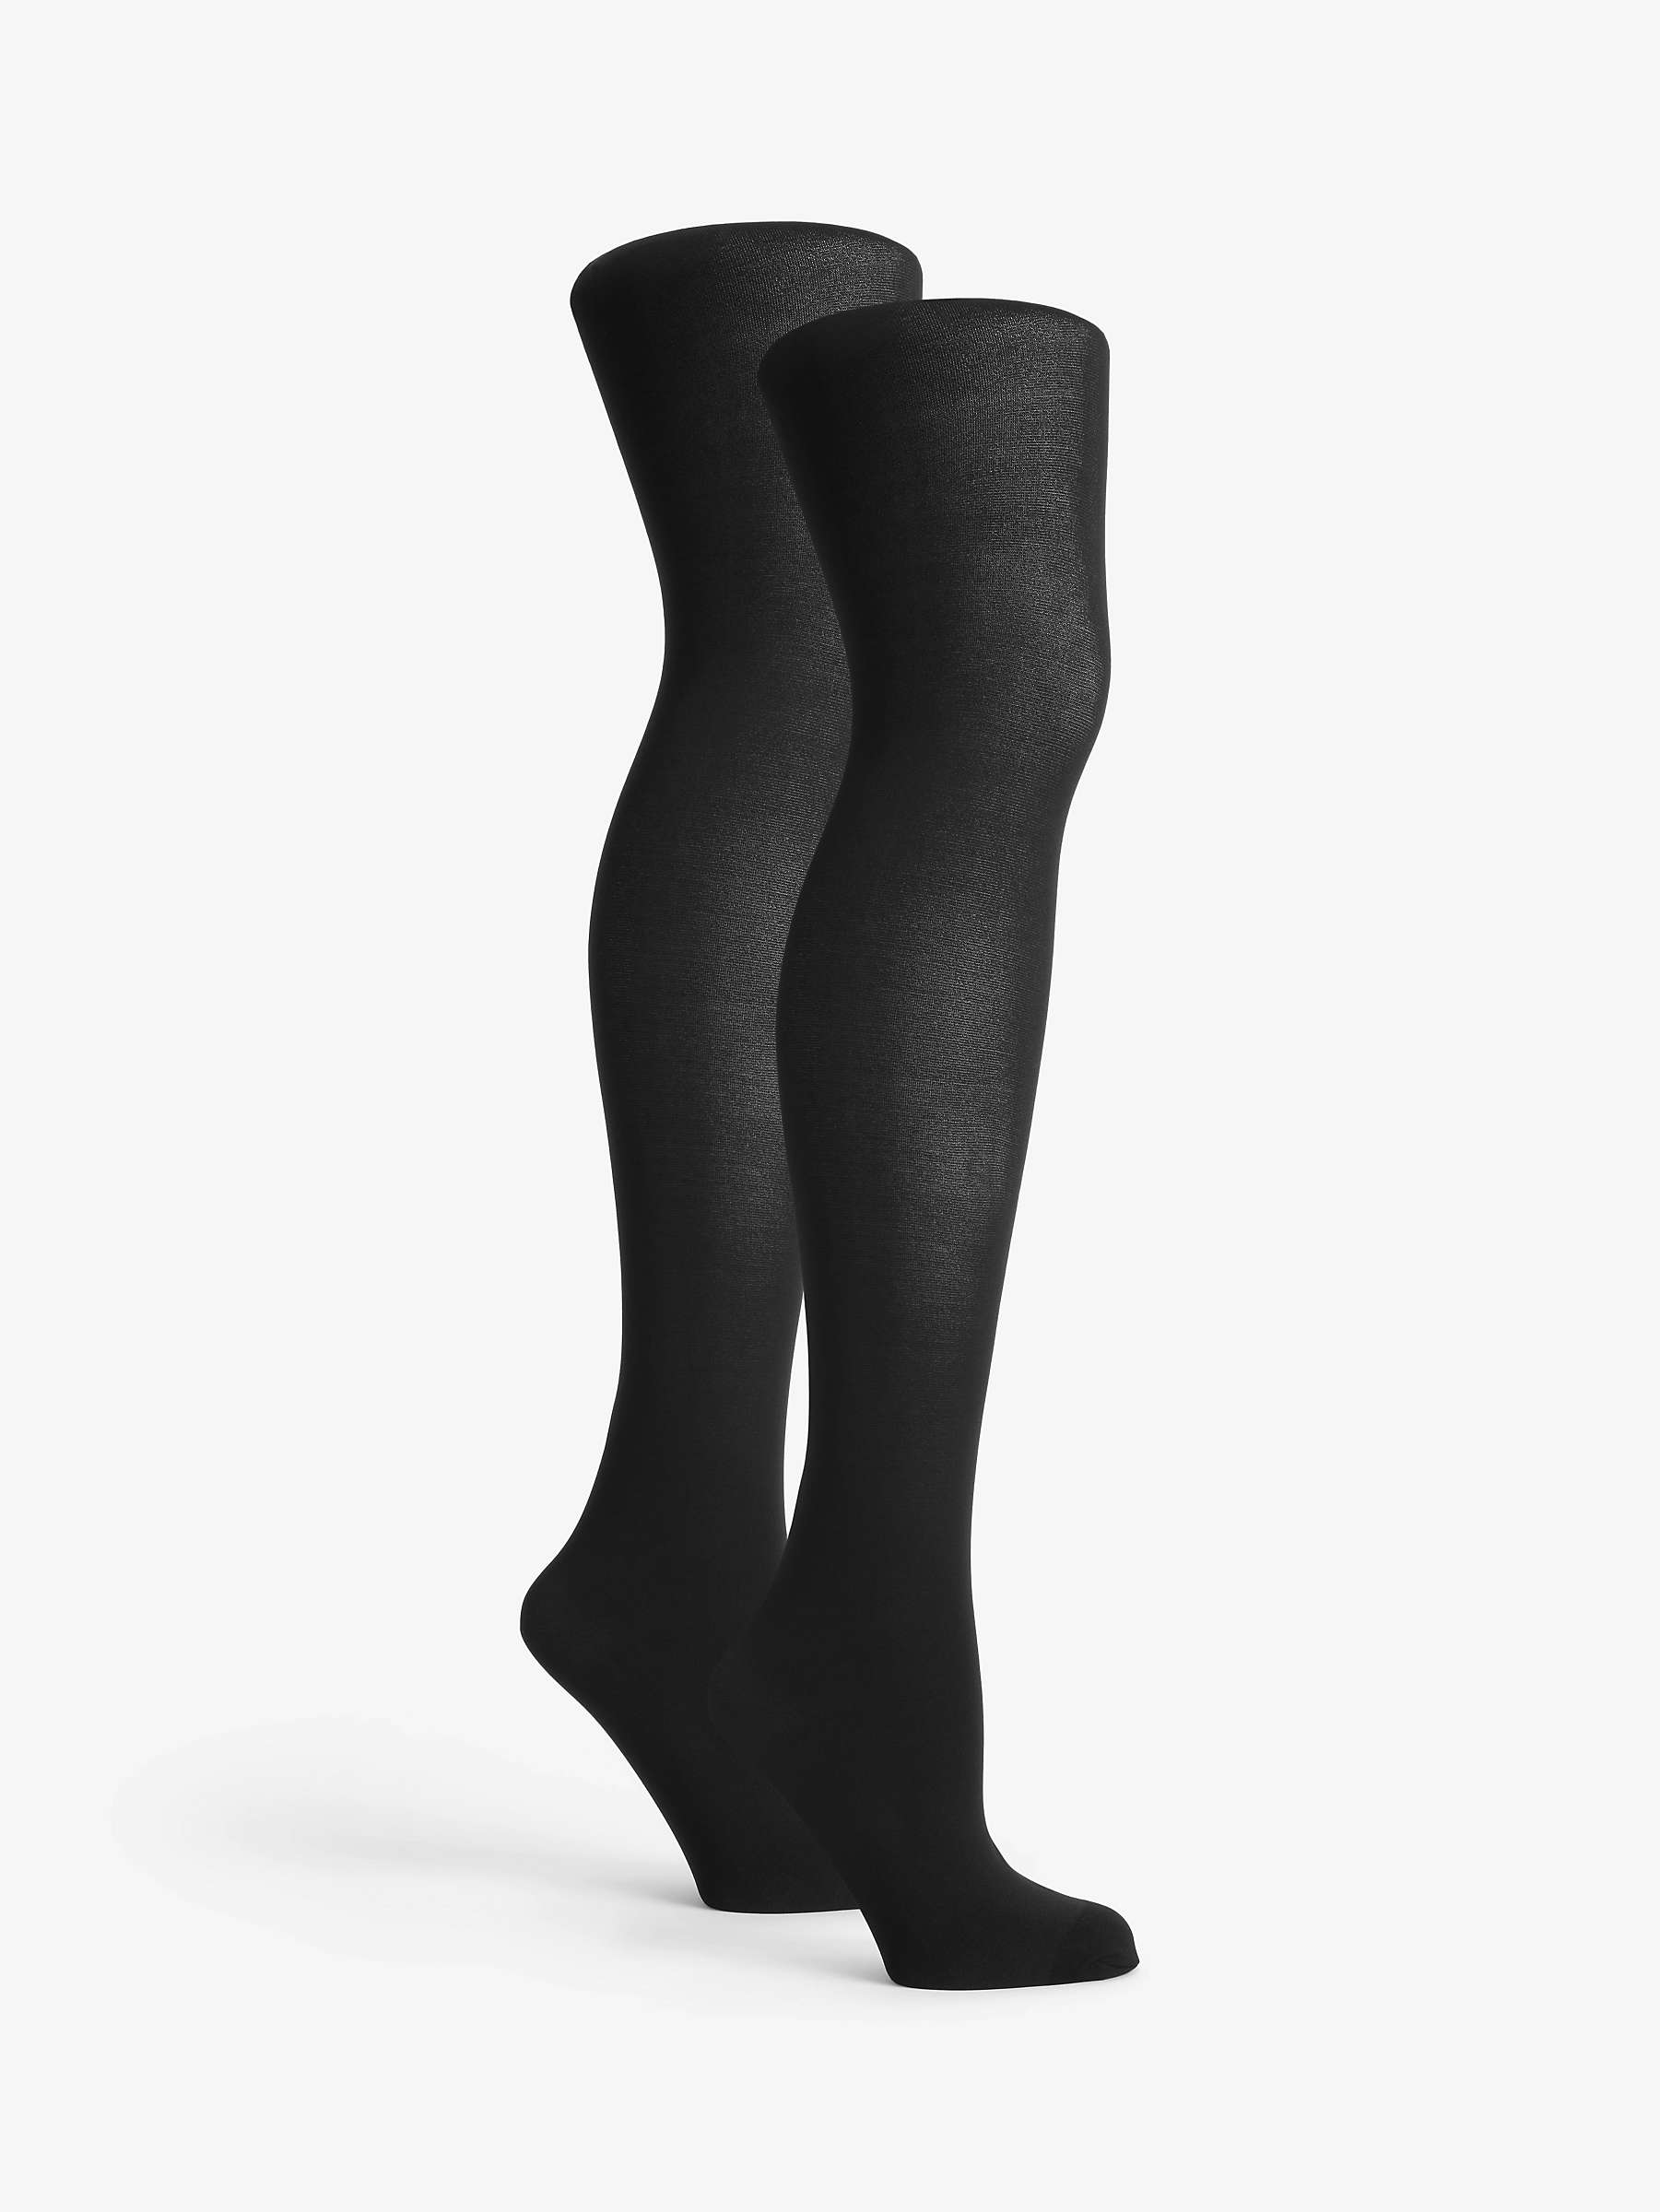 Buy John Lewis ANYDAY 80 Denier Opaque Tights, Pack of 2, Black Online at johnlewis.com